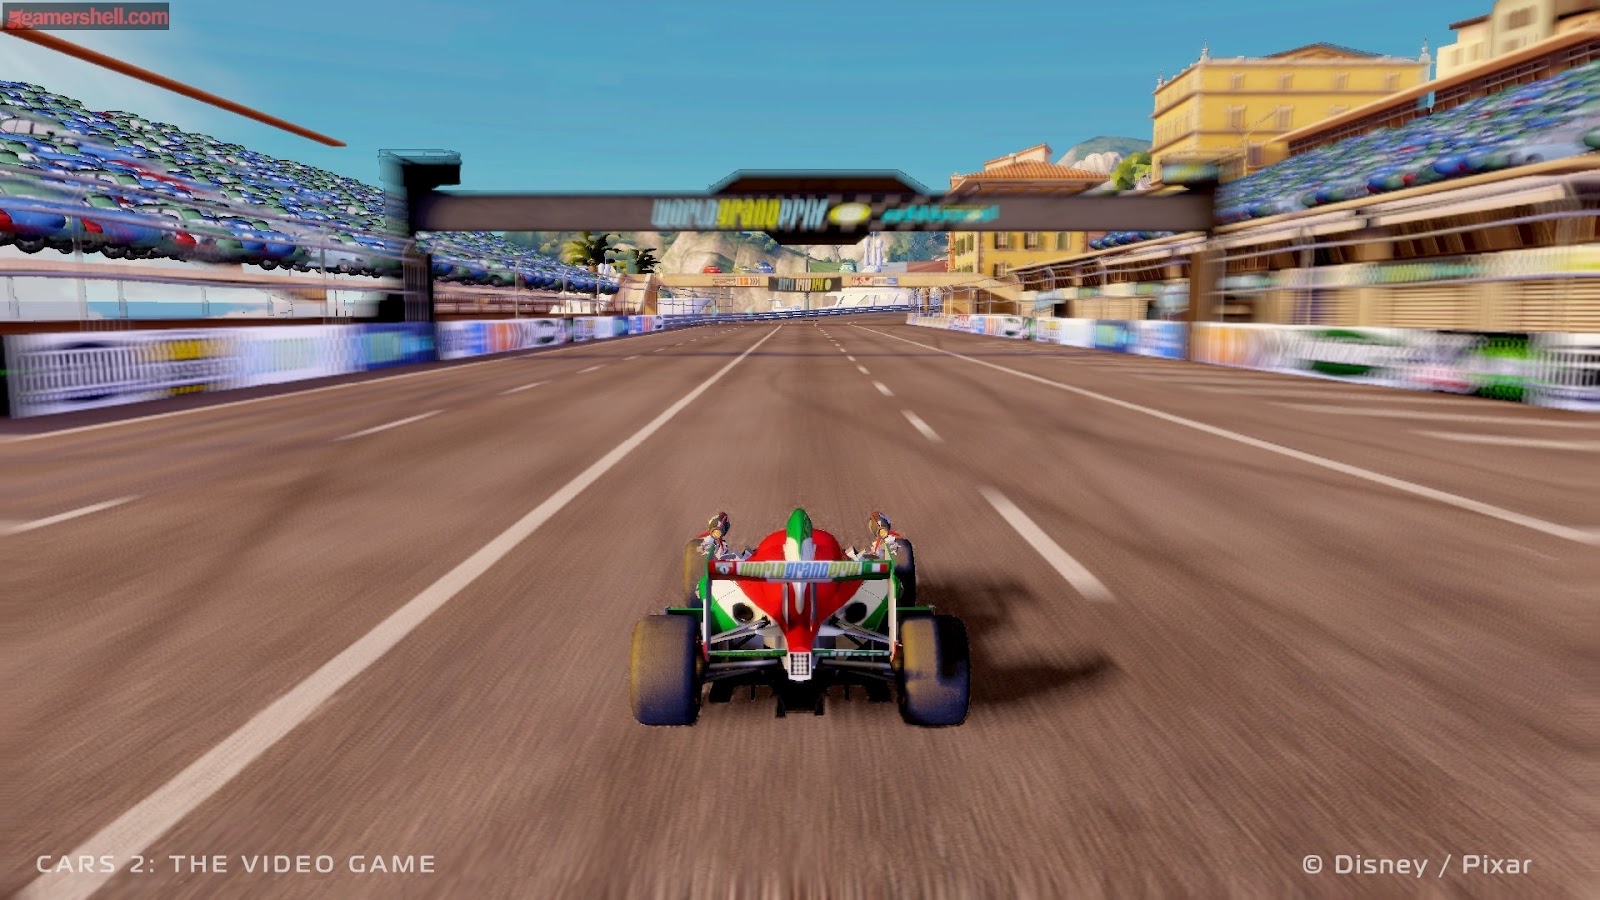 The Game Kita: Free Download Cars 2 The Video Game For PC, Mediafire